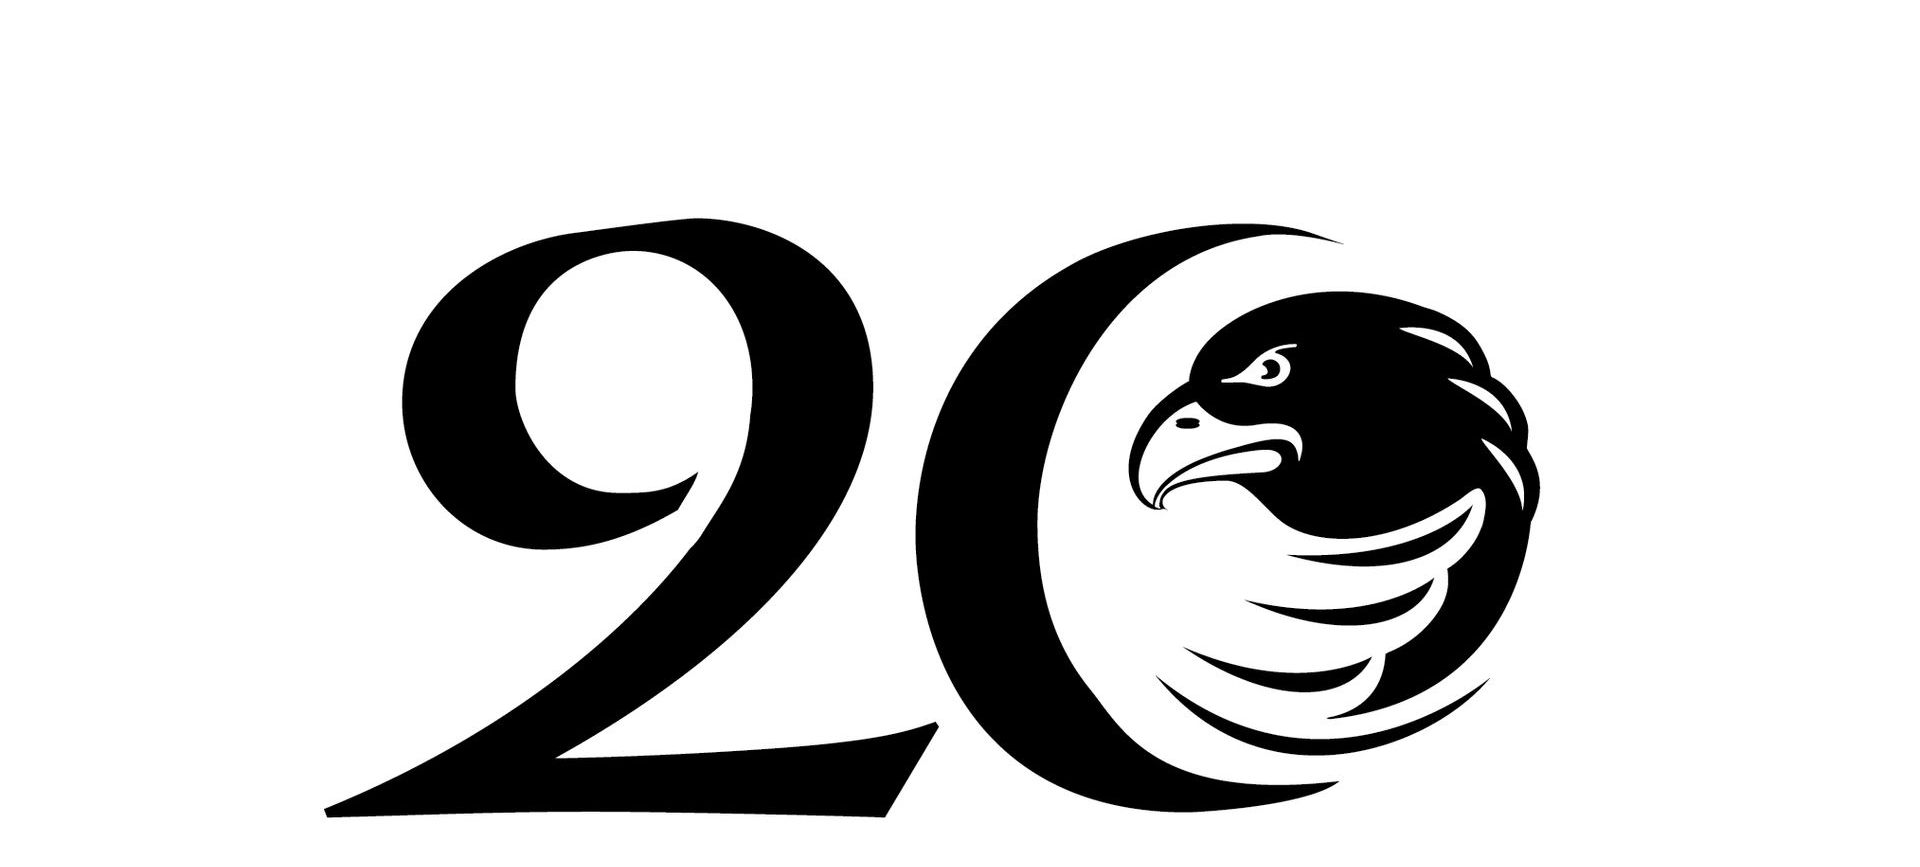 A black and white logo for the number 20 with an eagle in the middle.